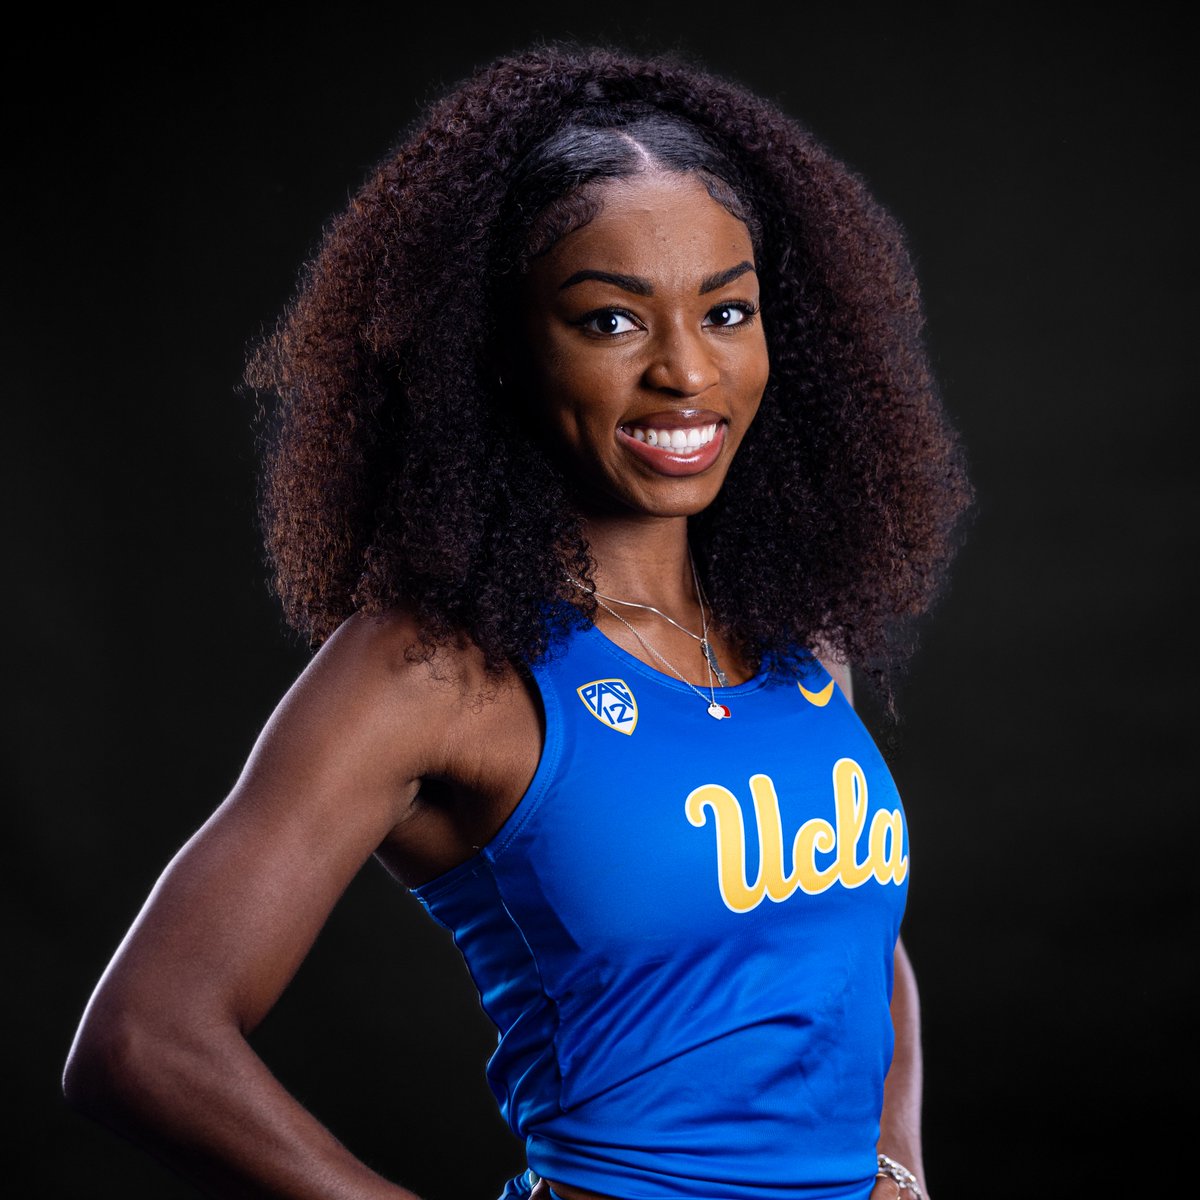 Aly Conyers qualifies for the women's 400m final at the Pac-12 Championships! #GoBruins x #Pac12TF